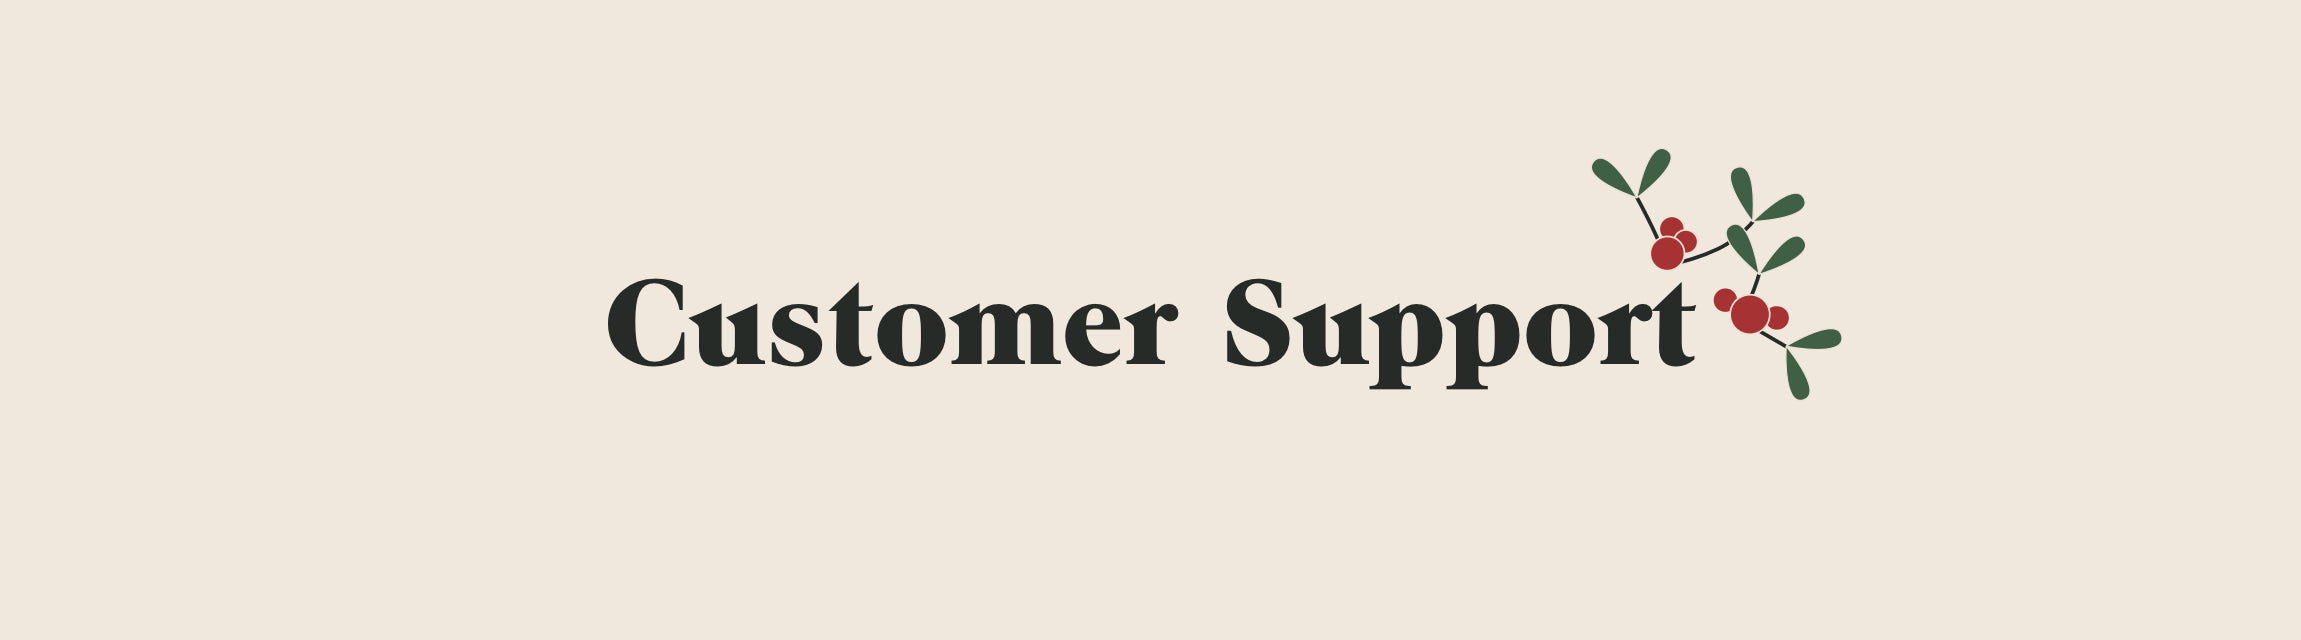 Customer Support title with mistletoe icon